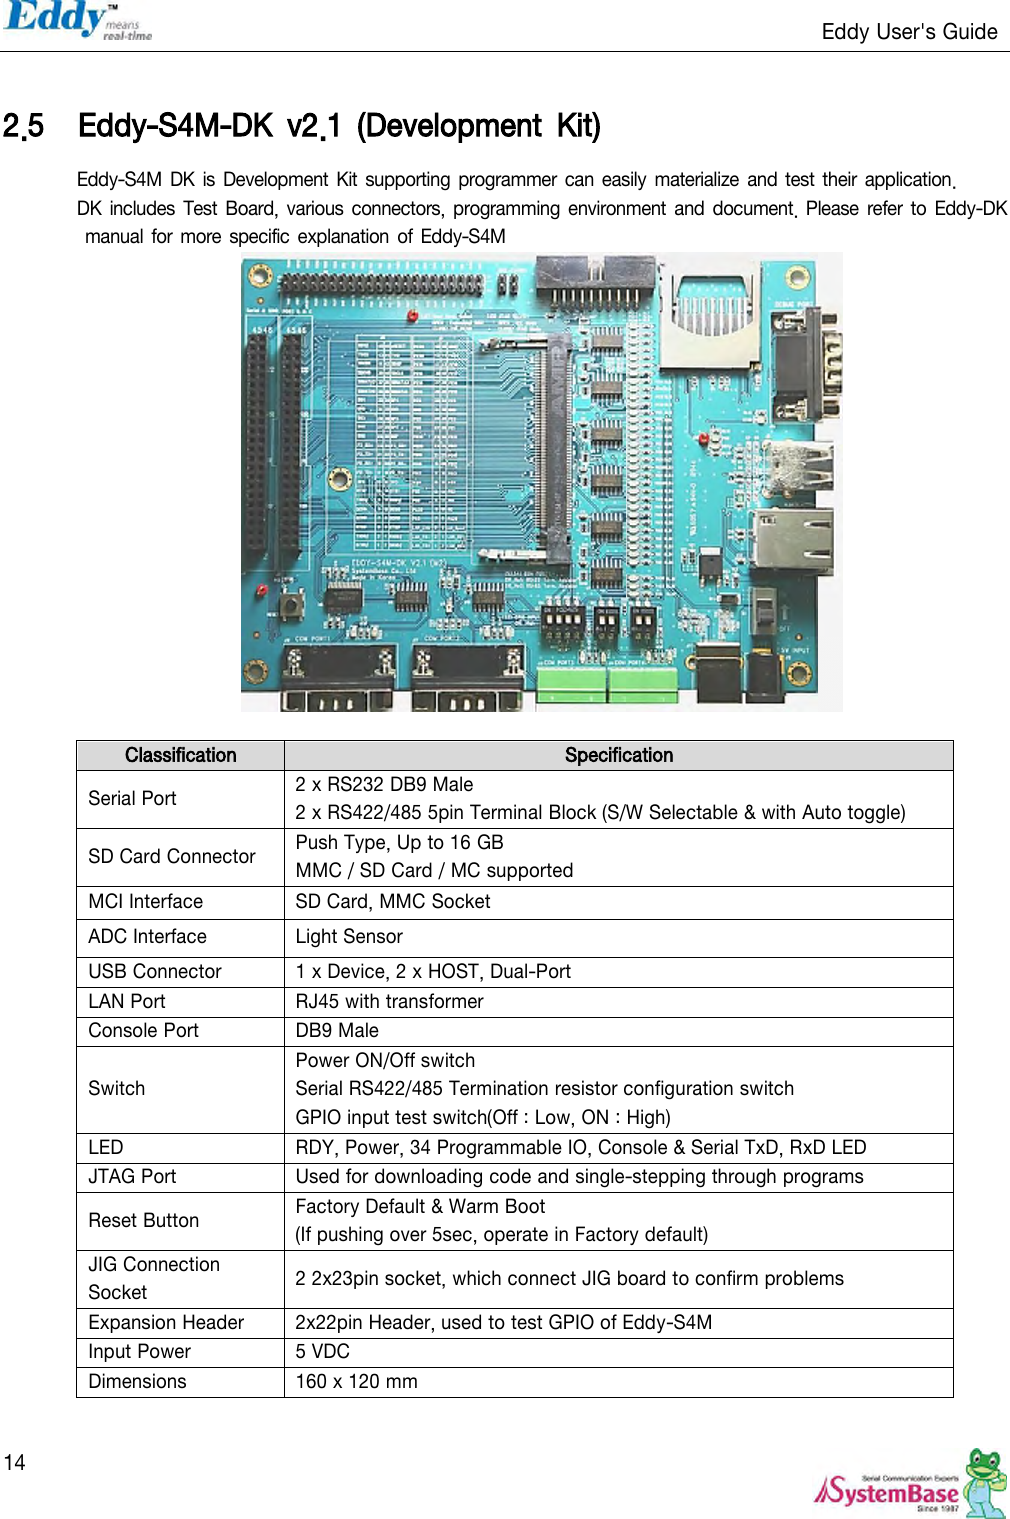                                                                   Eddy User&apos;s Guide   14  2.5 Eddy-S4M-DK  v2.1  (Development  Kit) Eddy-S4M  DK is Development Kit supporting programmer  can easily materialize and test their  application. DK includes Test  Board, various  connectors, programming environment  and document. Please  refer to  Eddy-DK manual for more specific explanation of Eddy-S4M      Classification Specification Serial Port 2 x RS232 DB9 Male 2 x RS422/485 5pin Terminal Block (S/W Selectable &amp; with Auto toggle) SD Card Connector Push Type, Up to 16 GB MMC / SD Card / MC supported MCI Interface SD Card, MMC Socket ADC Interface Light Sensor USB Connector 1 x Device, 2 x HOST, Dual-Port   LAN Port RJ45 with transformer Console Port DB9 Male Switch Power ON/Off switch Serial RS422/485 Termination resistor configuration switch GPIO input test switch(Off : Low, ON : High) LED RDY, Power, 34 Programmable IO, Console &amp; Serial TxD, RxD LED JTAG Port Used for downloading code and single-stepping through programs Reset Button Factory Default &amp; Warm Boot (If pushing over 5sec, operate in Factory default) JIG Connection Socket 2 2x23pin socket, which connect JIG board to confirm problems Expansion Header 2x22pin Header, used to test GPIO of Eddy-S4M Input Power 5 VDC Dimensions 160 x 120 mm  